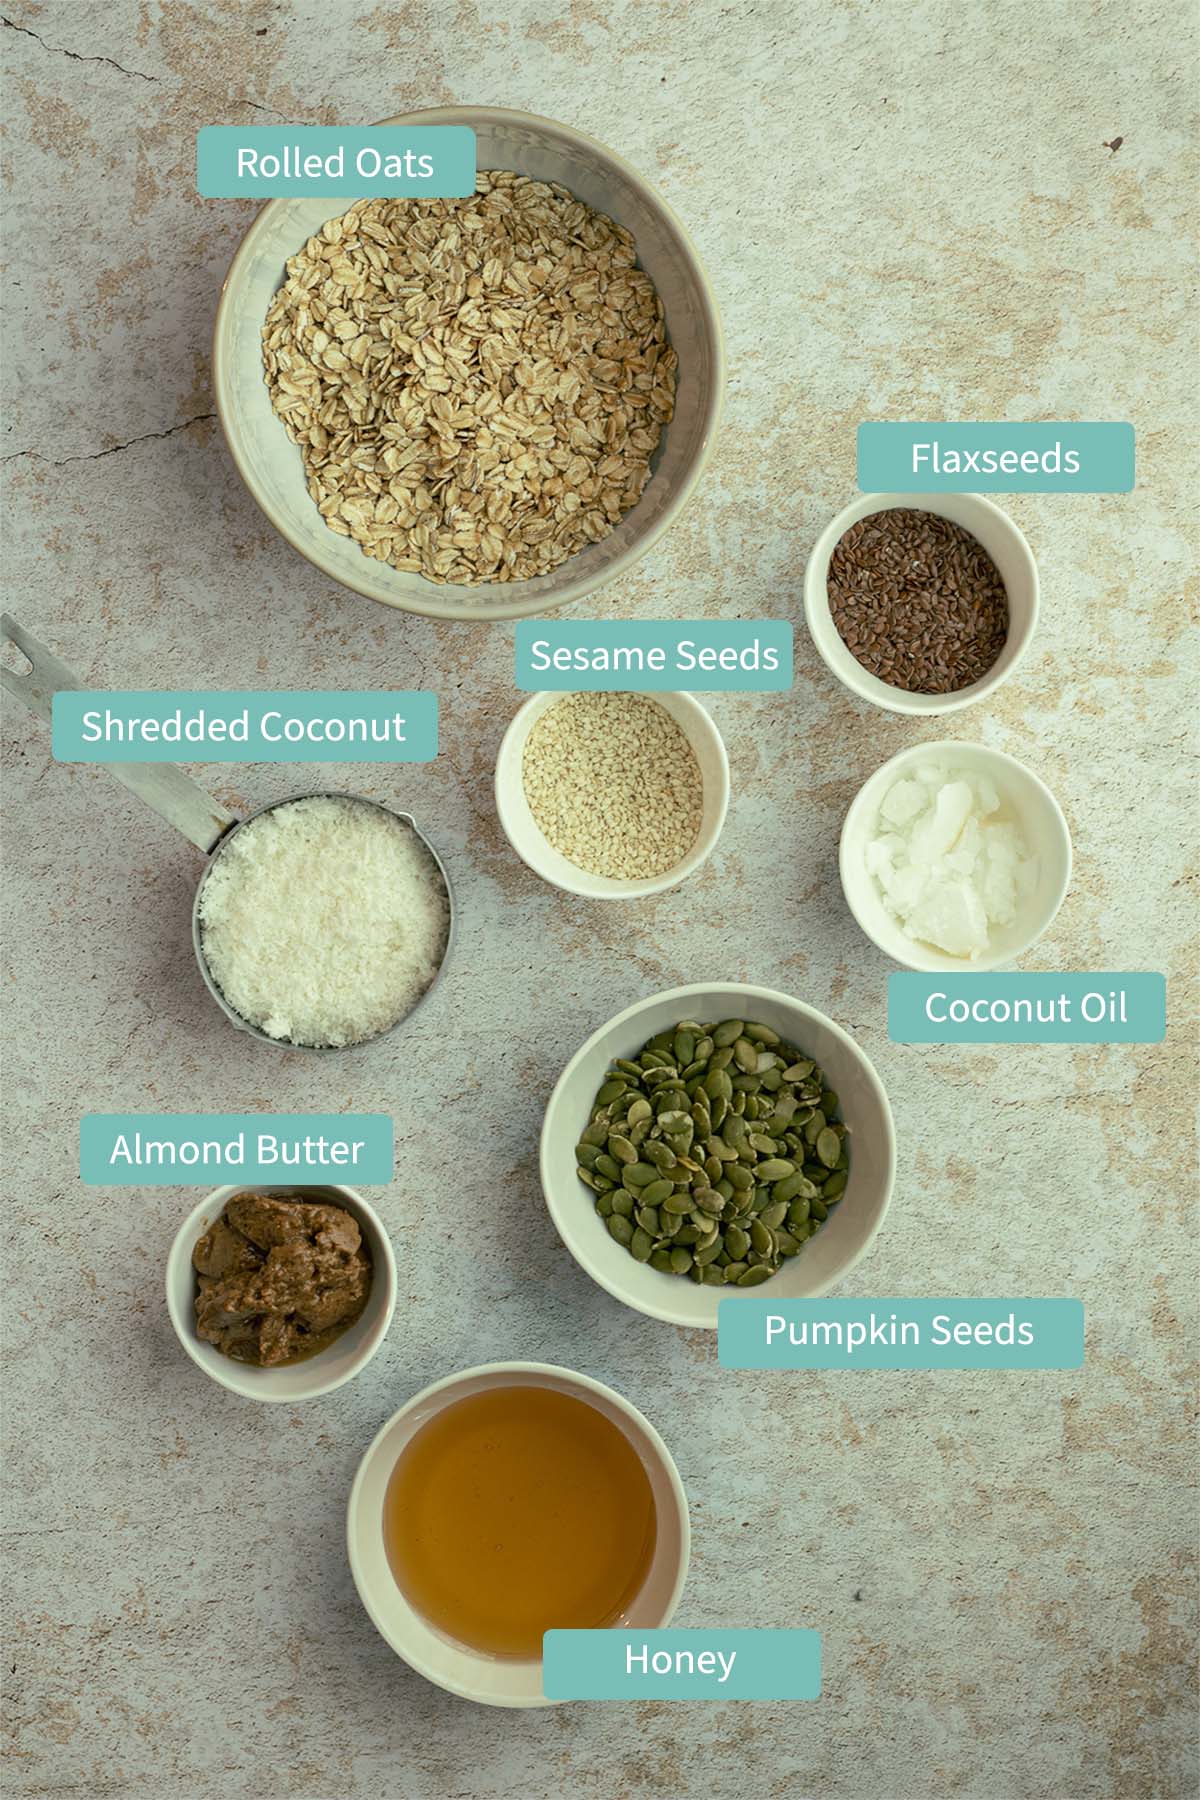 Ingredients for homemade Granola bars